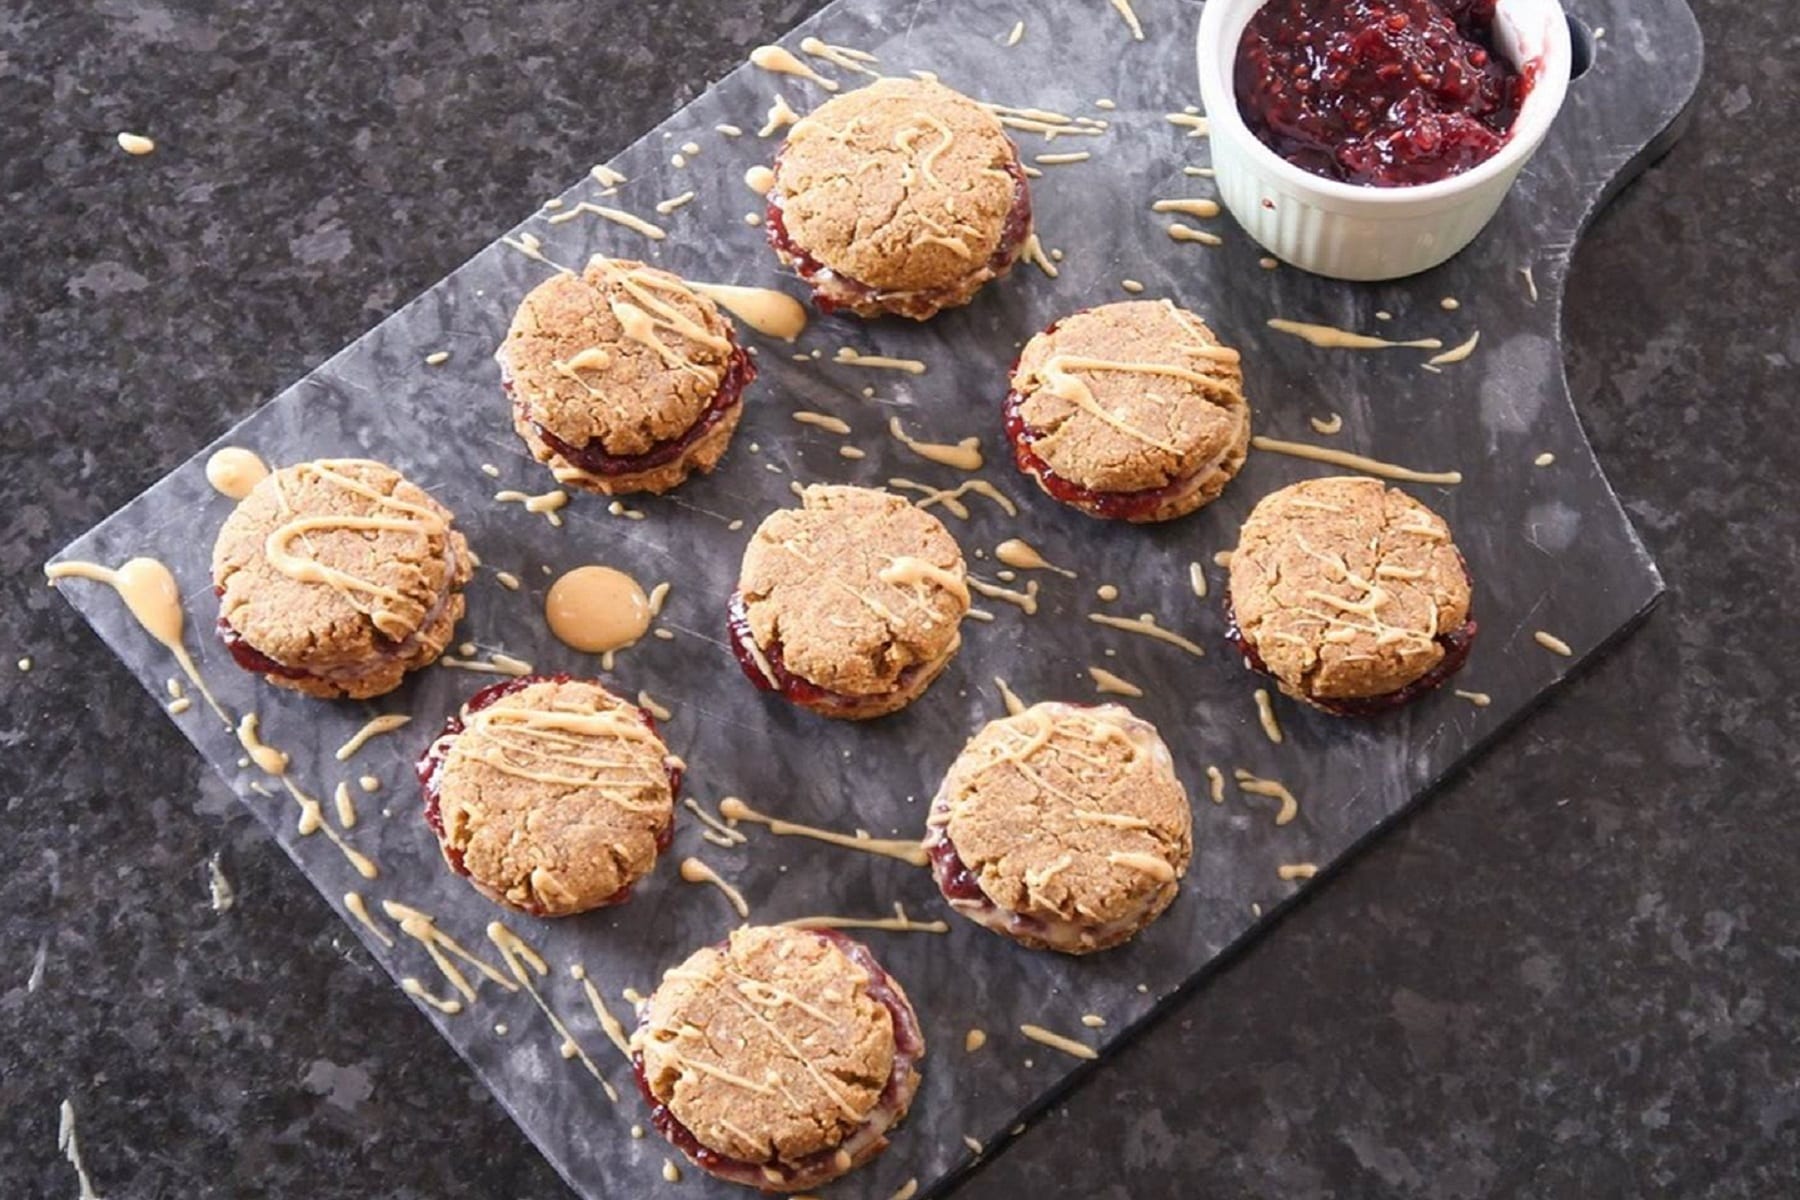 Niall’s Peanut Butter & Jelly Protein Cookies